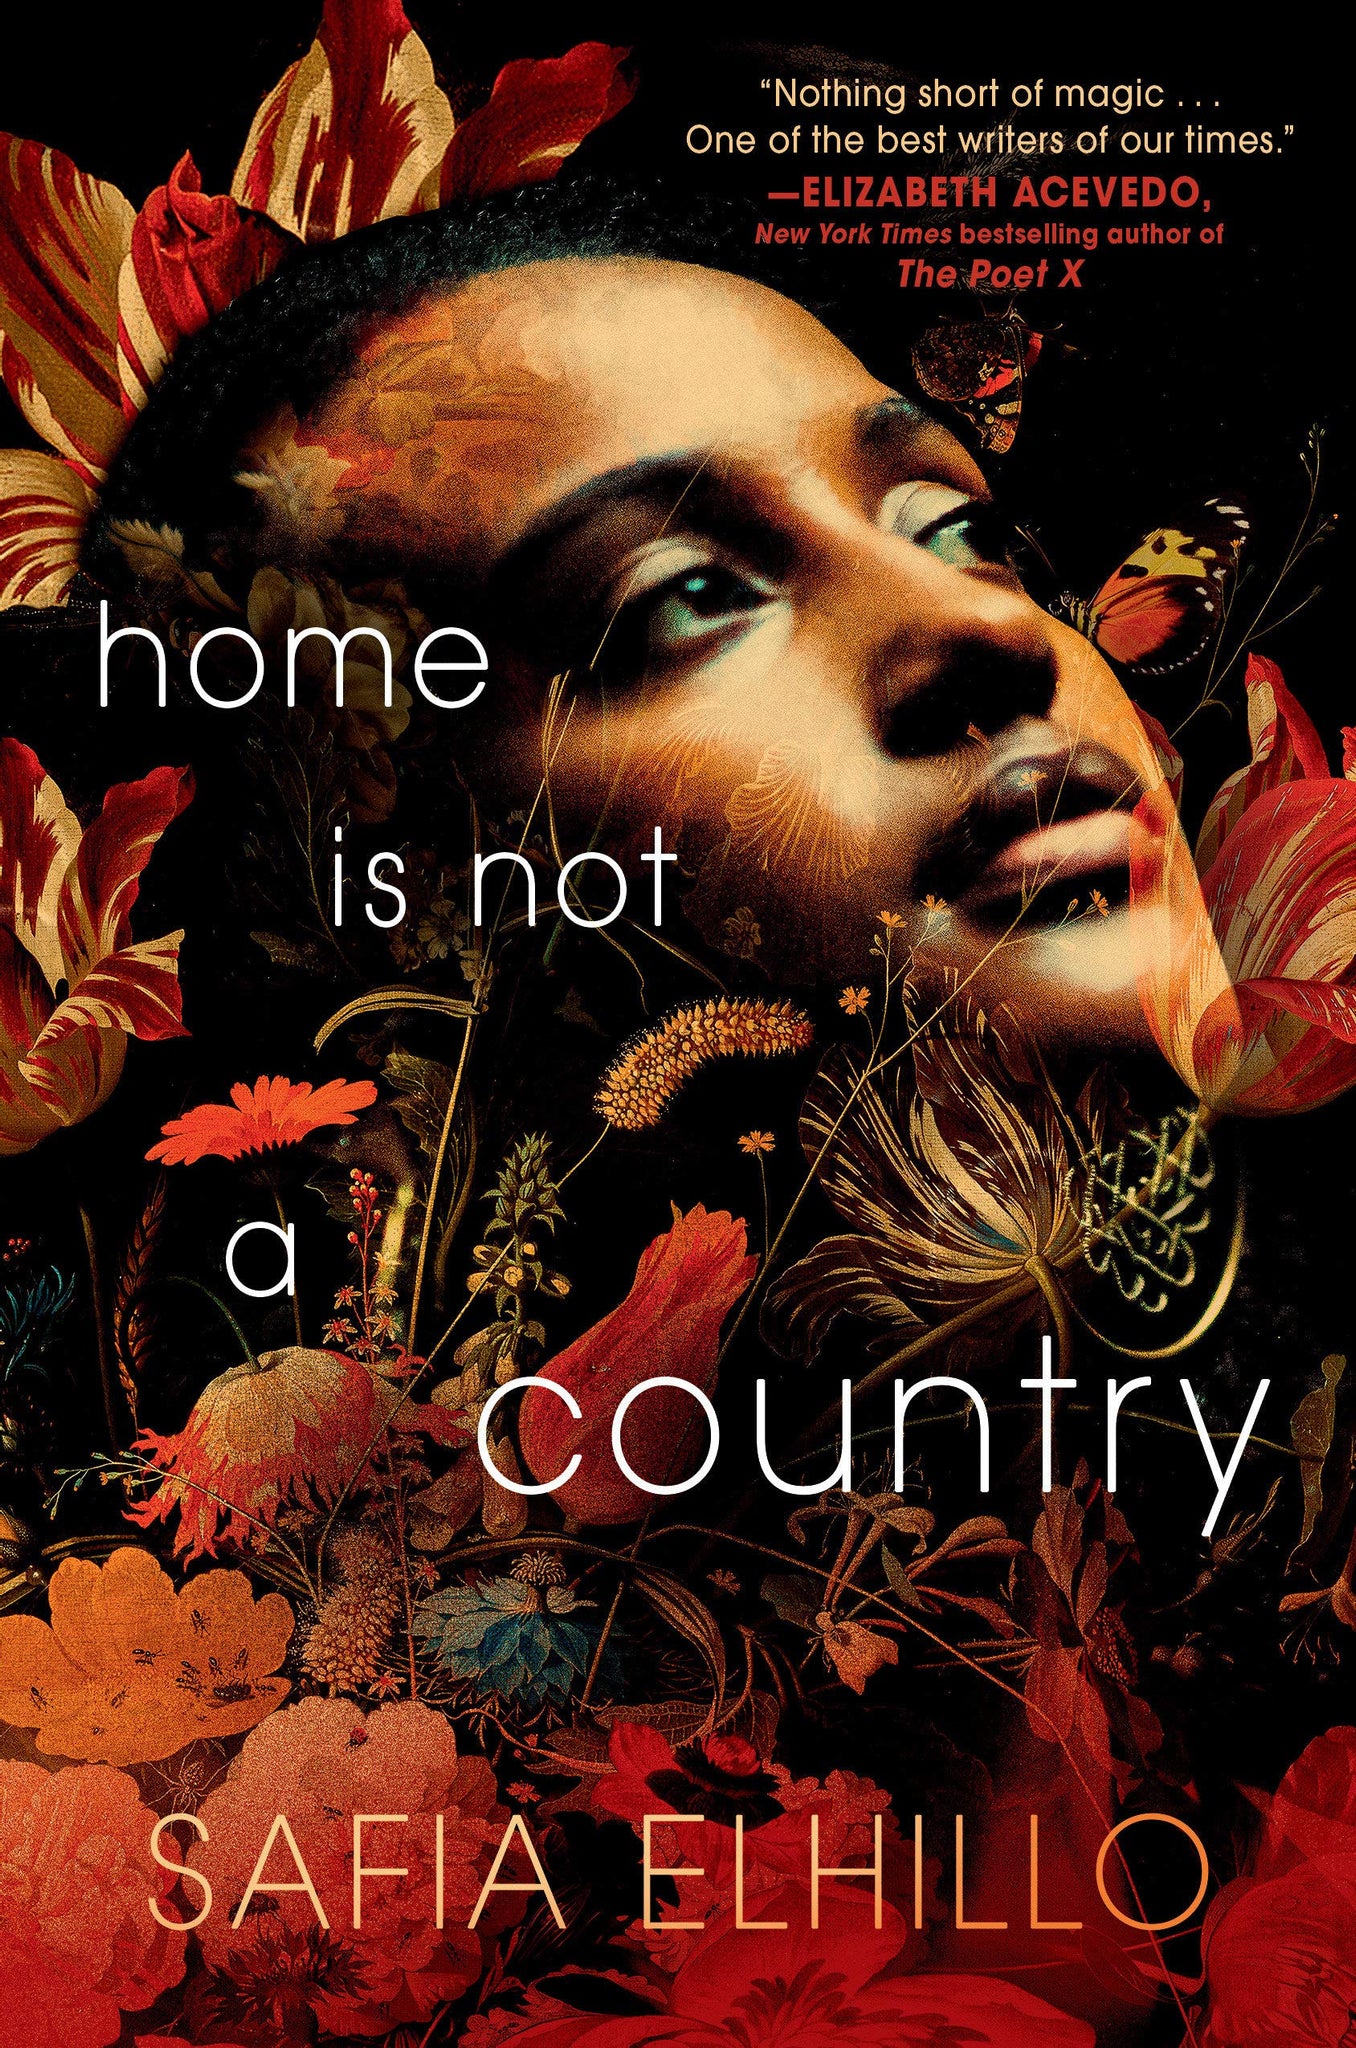 Home Is Not a Country (Hardcover)